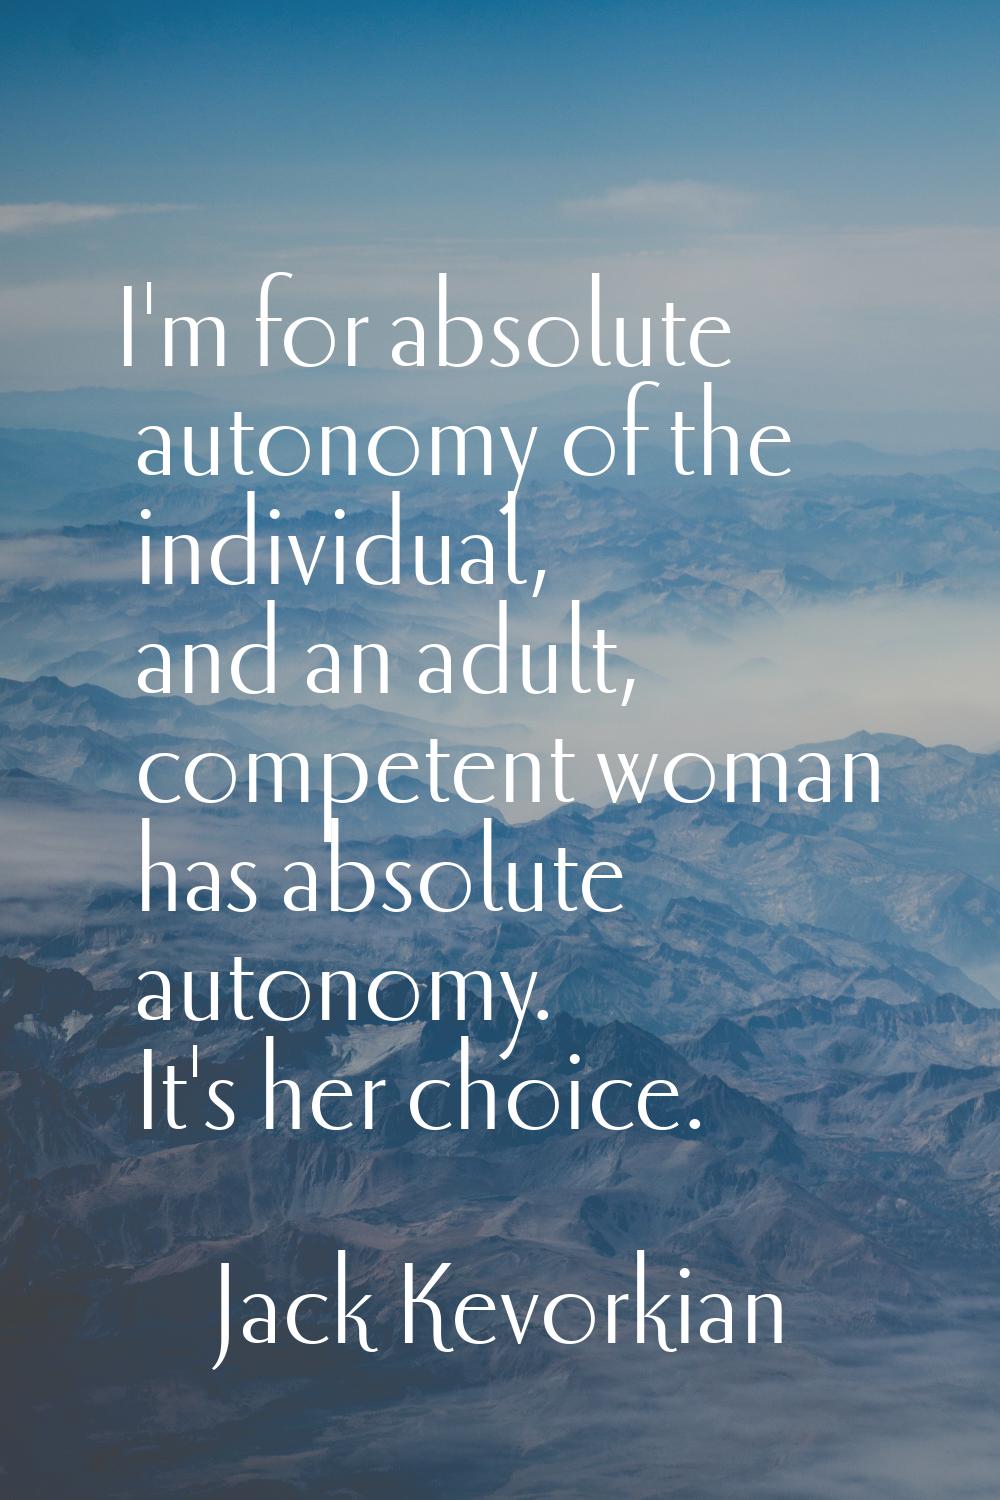 I'm for absolute autonomy of the individual, and an adult, competent woman has absolute autonomy. I